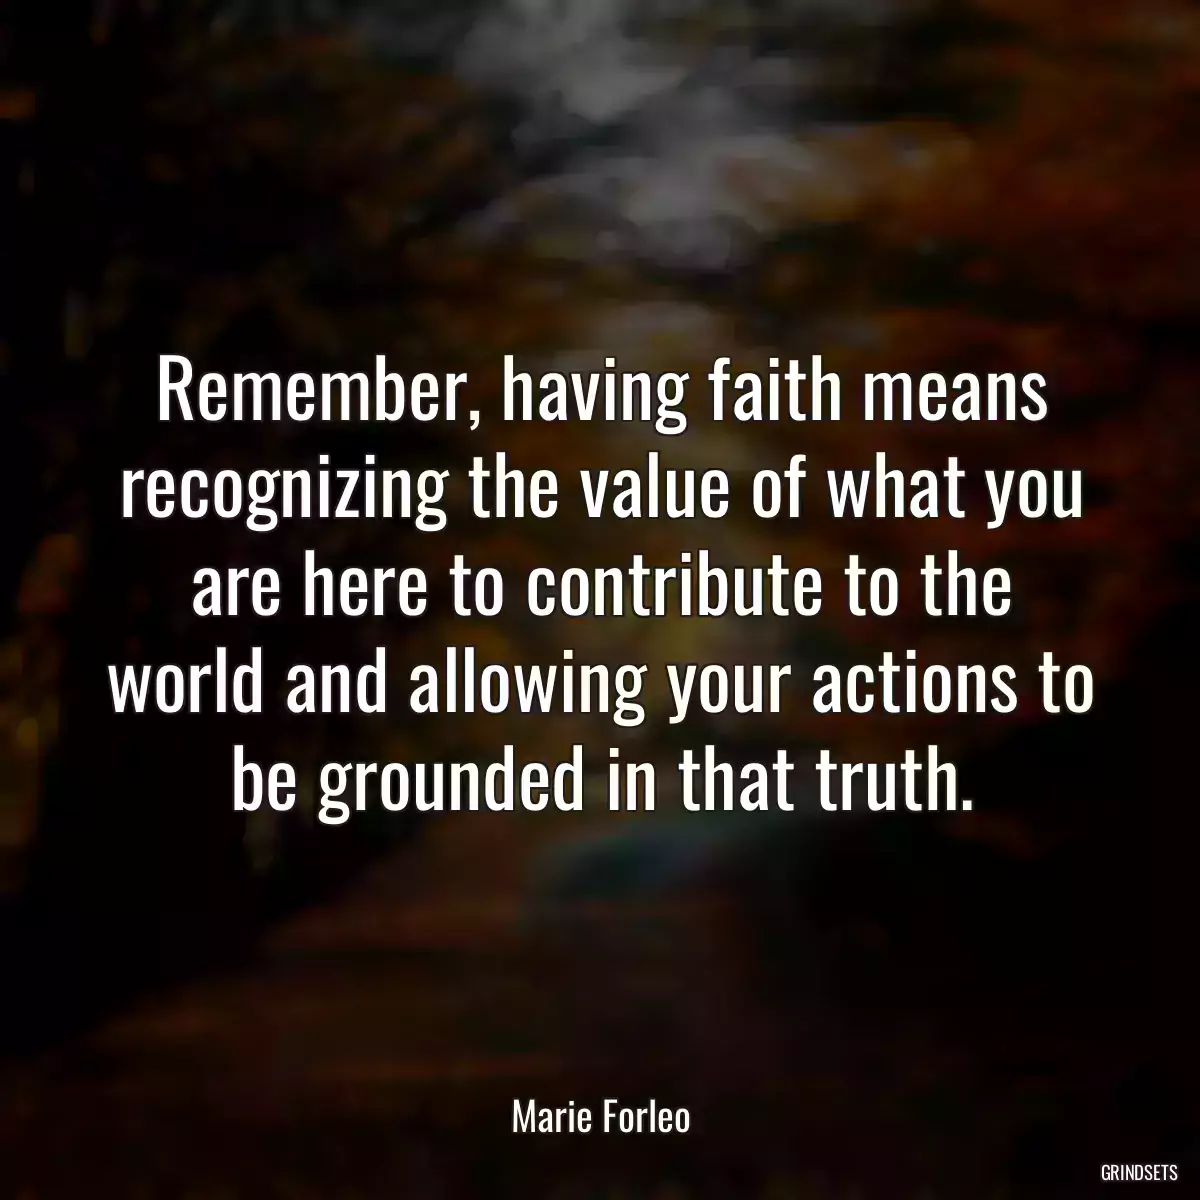 Remember, having faith means recognizing the value of what you are here to contribute to the world and allowing your actions to be grounded in that truth.